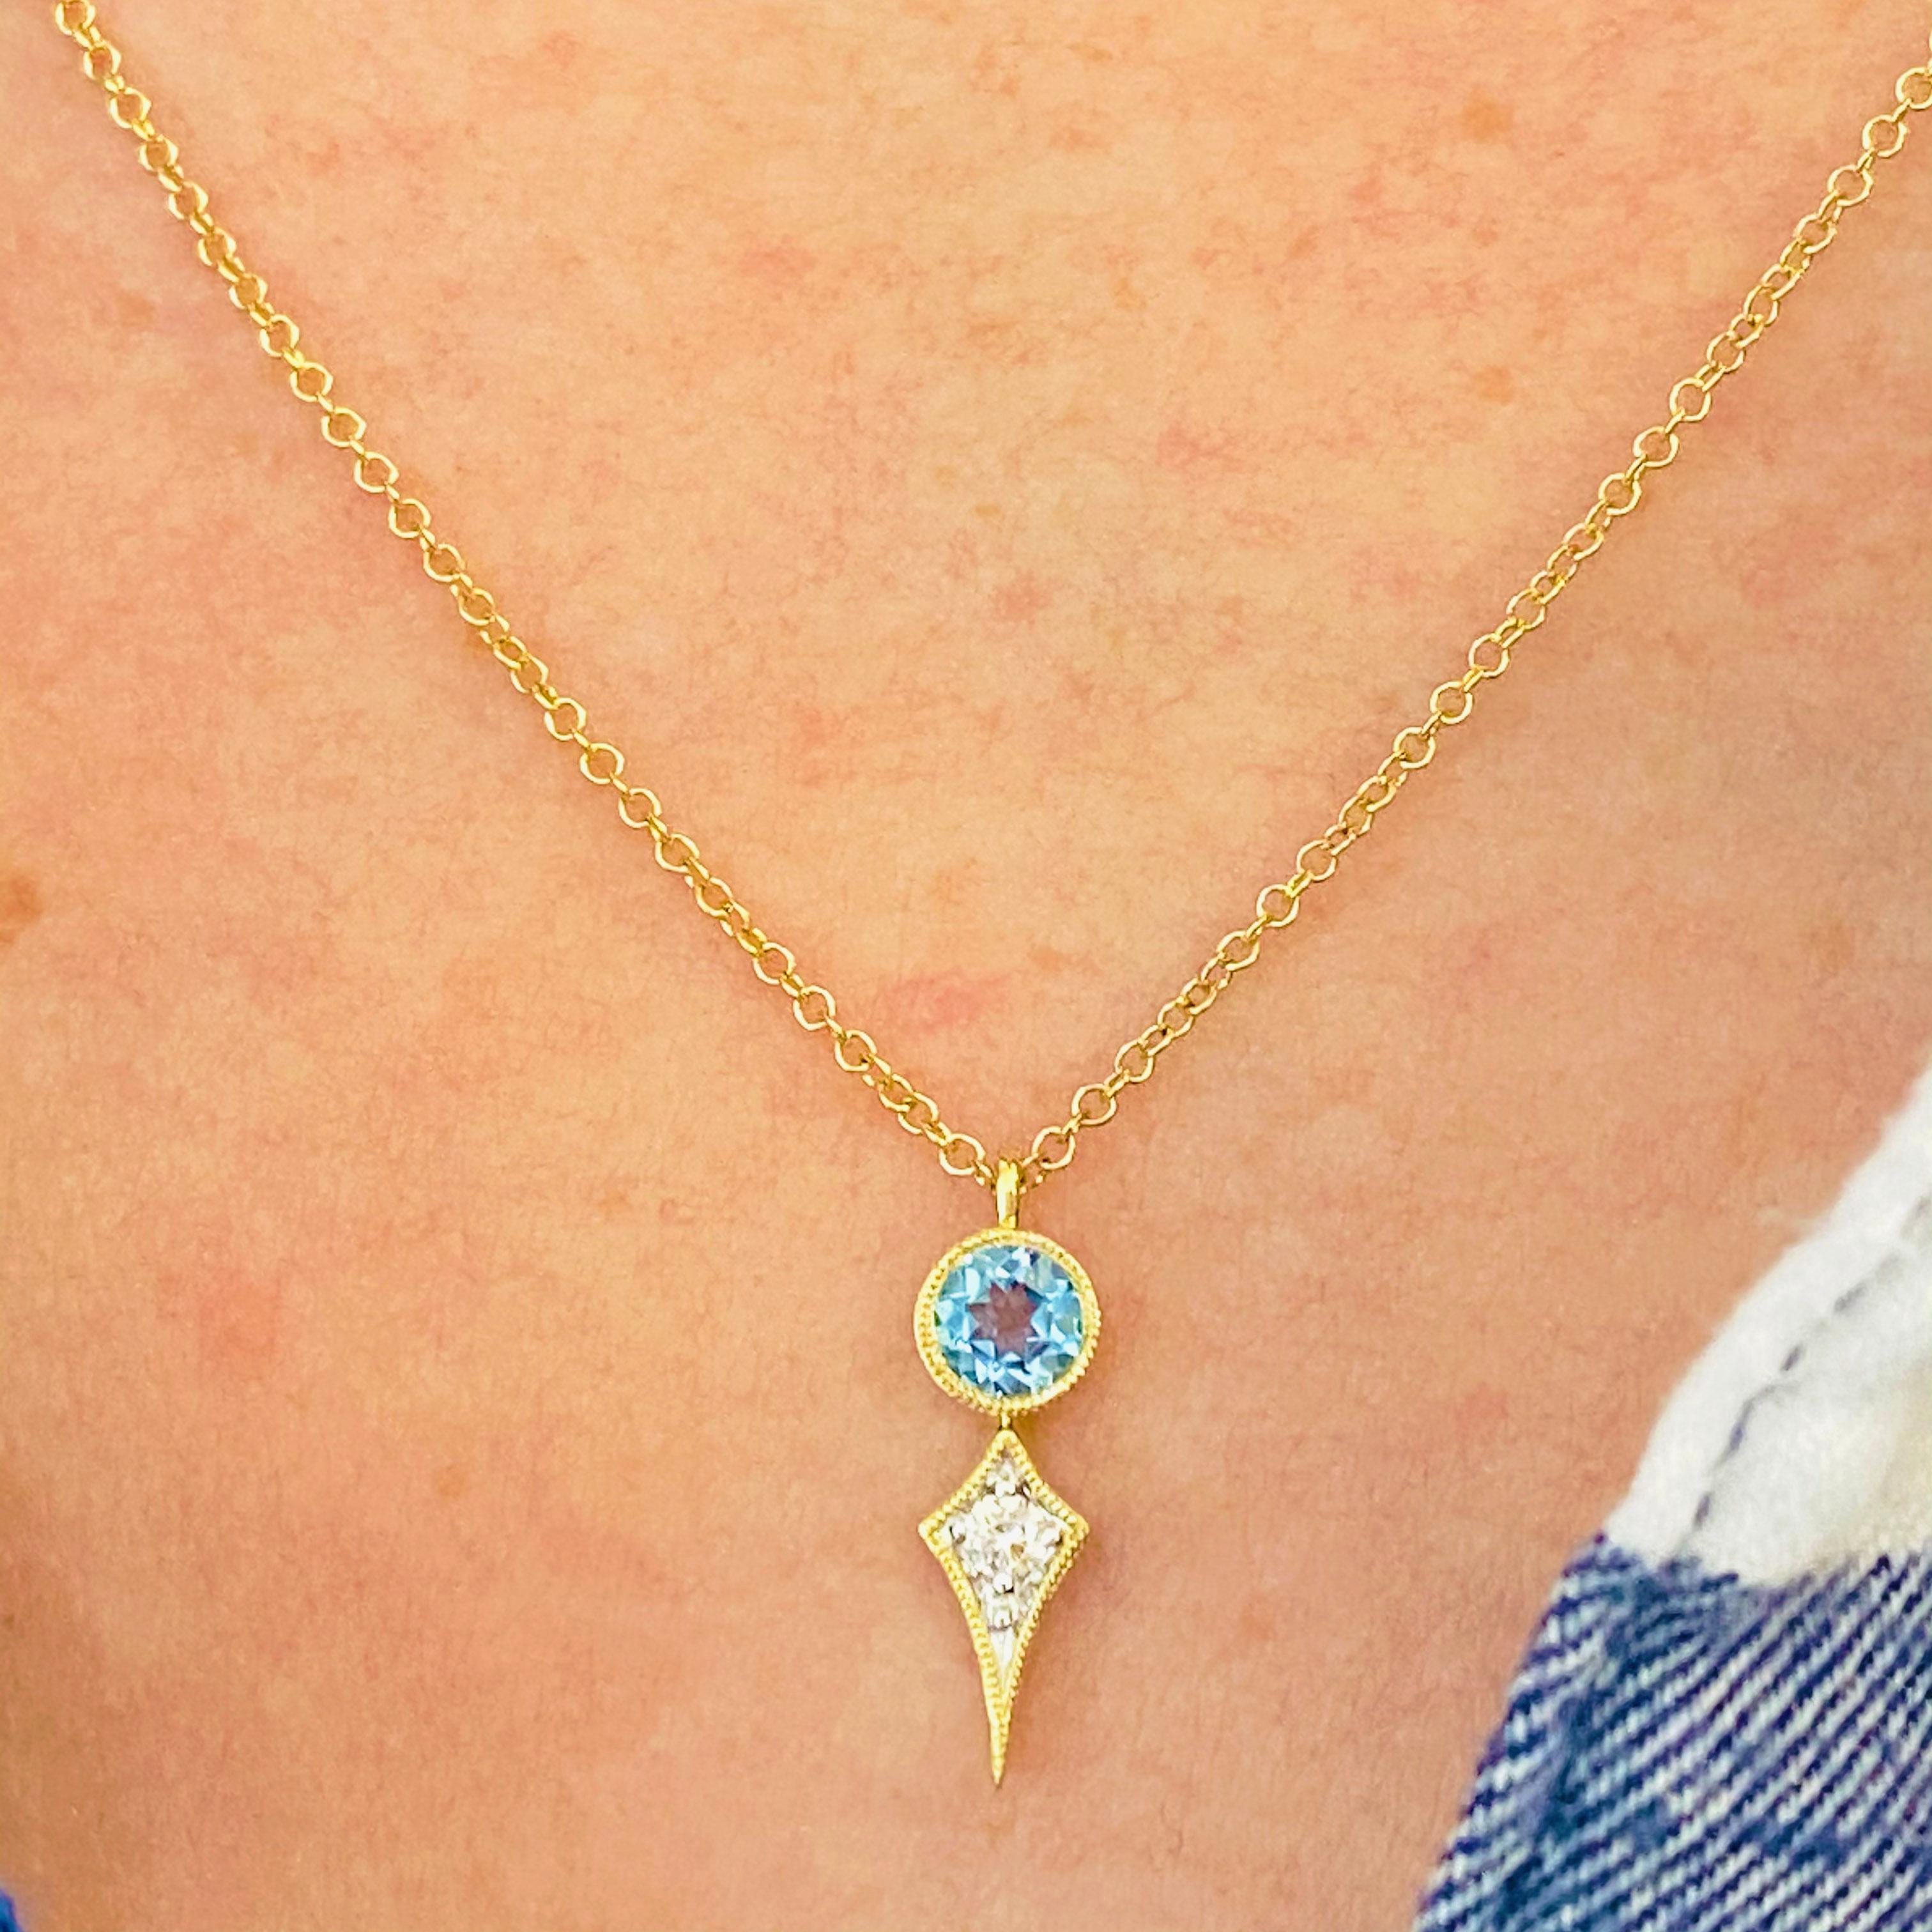 This stunningly beautiful genuine Swiss blue topaz set in polished 14k yellow gold next to a brilliant white diamond provides a look that is very modern yet classic! This necklace is very fashionable and can add a touch of style to any outfit, yet